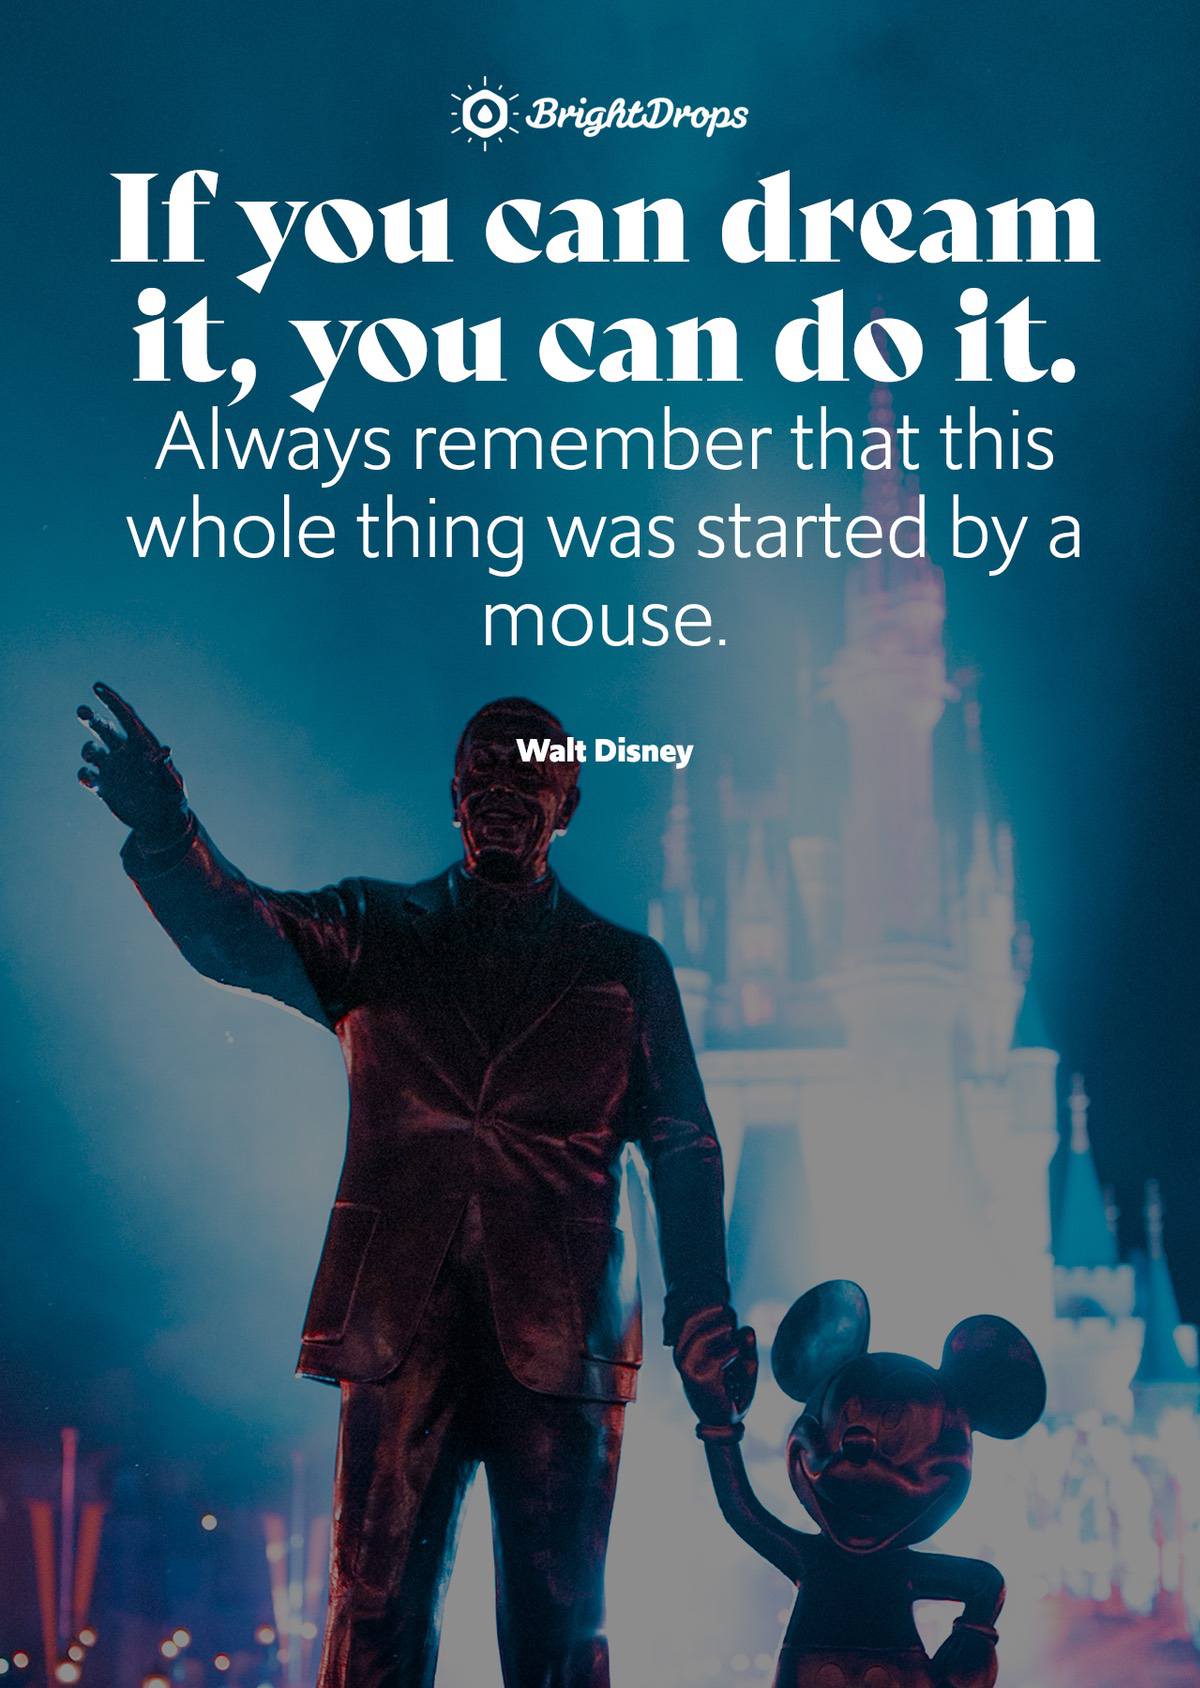 12 Walt Disney Quotes That Will Inspire You to Live Life to the Fullest -  Bright Drops